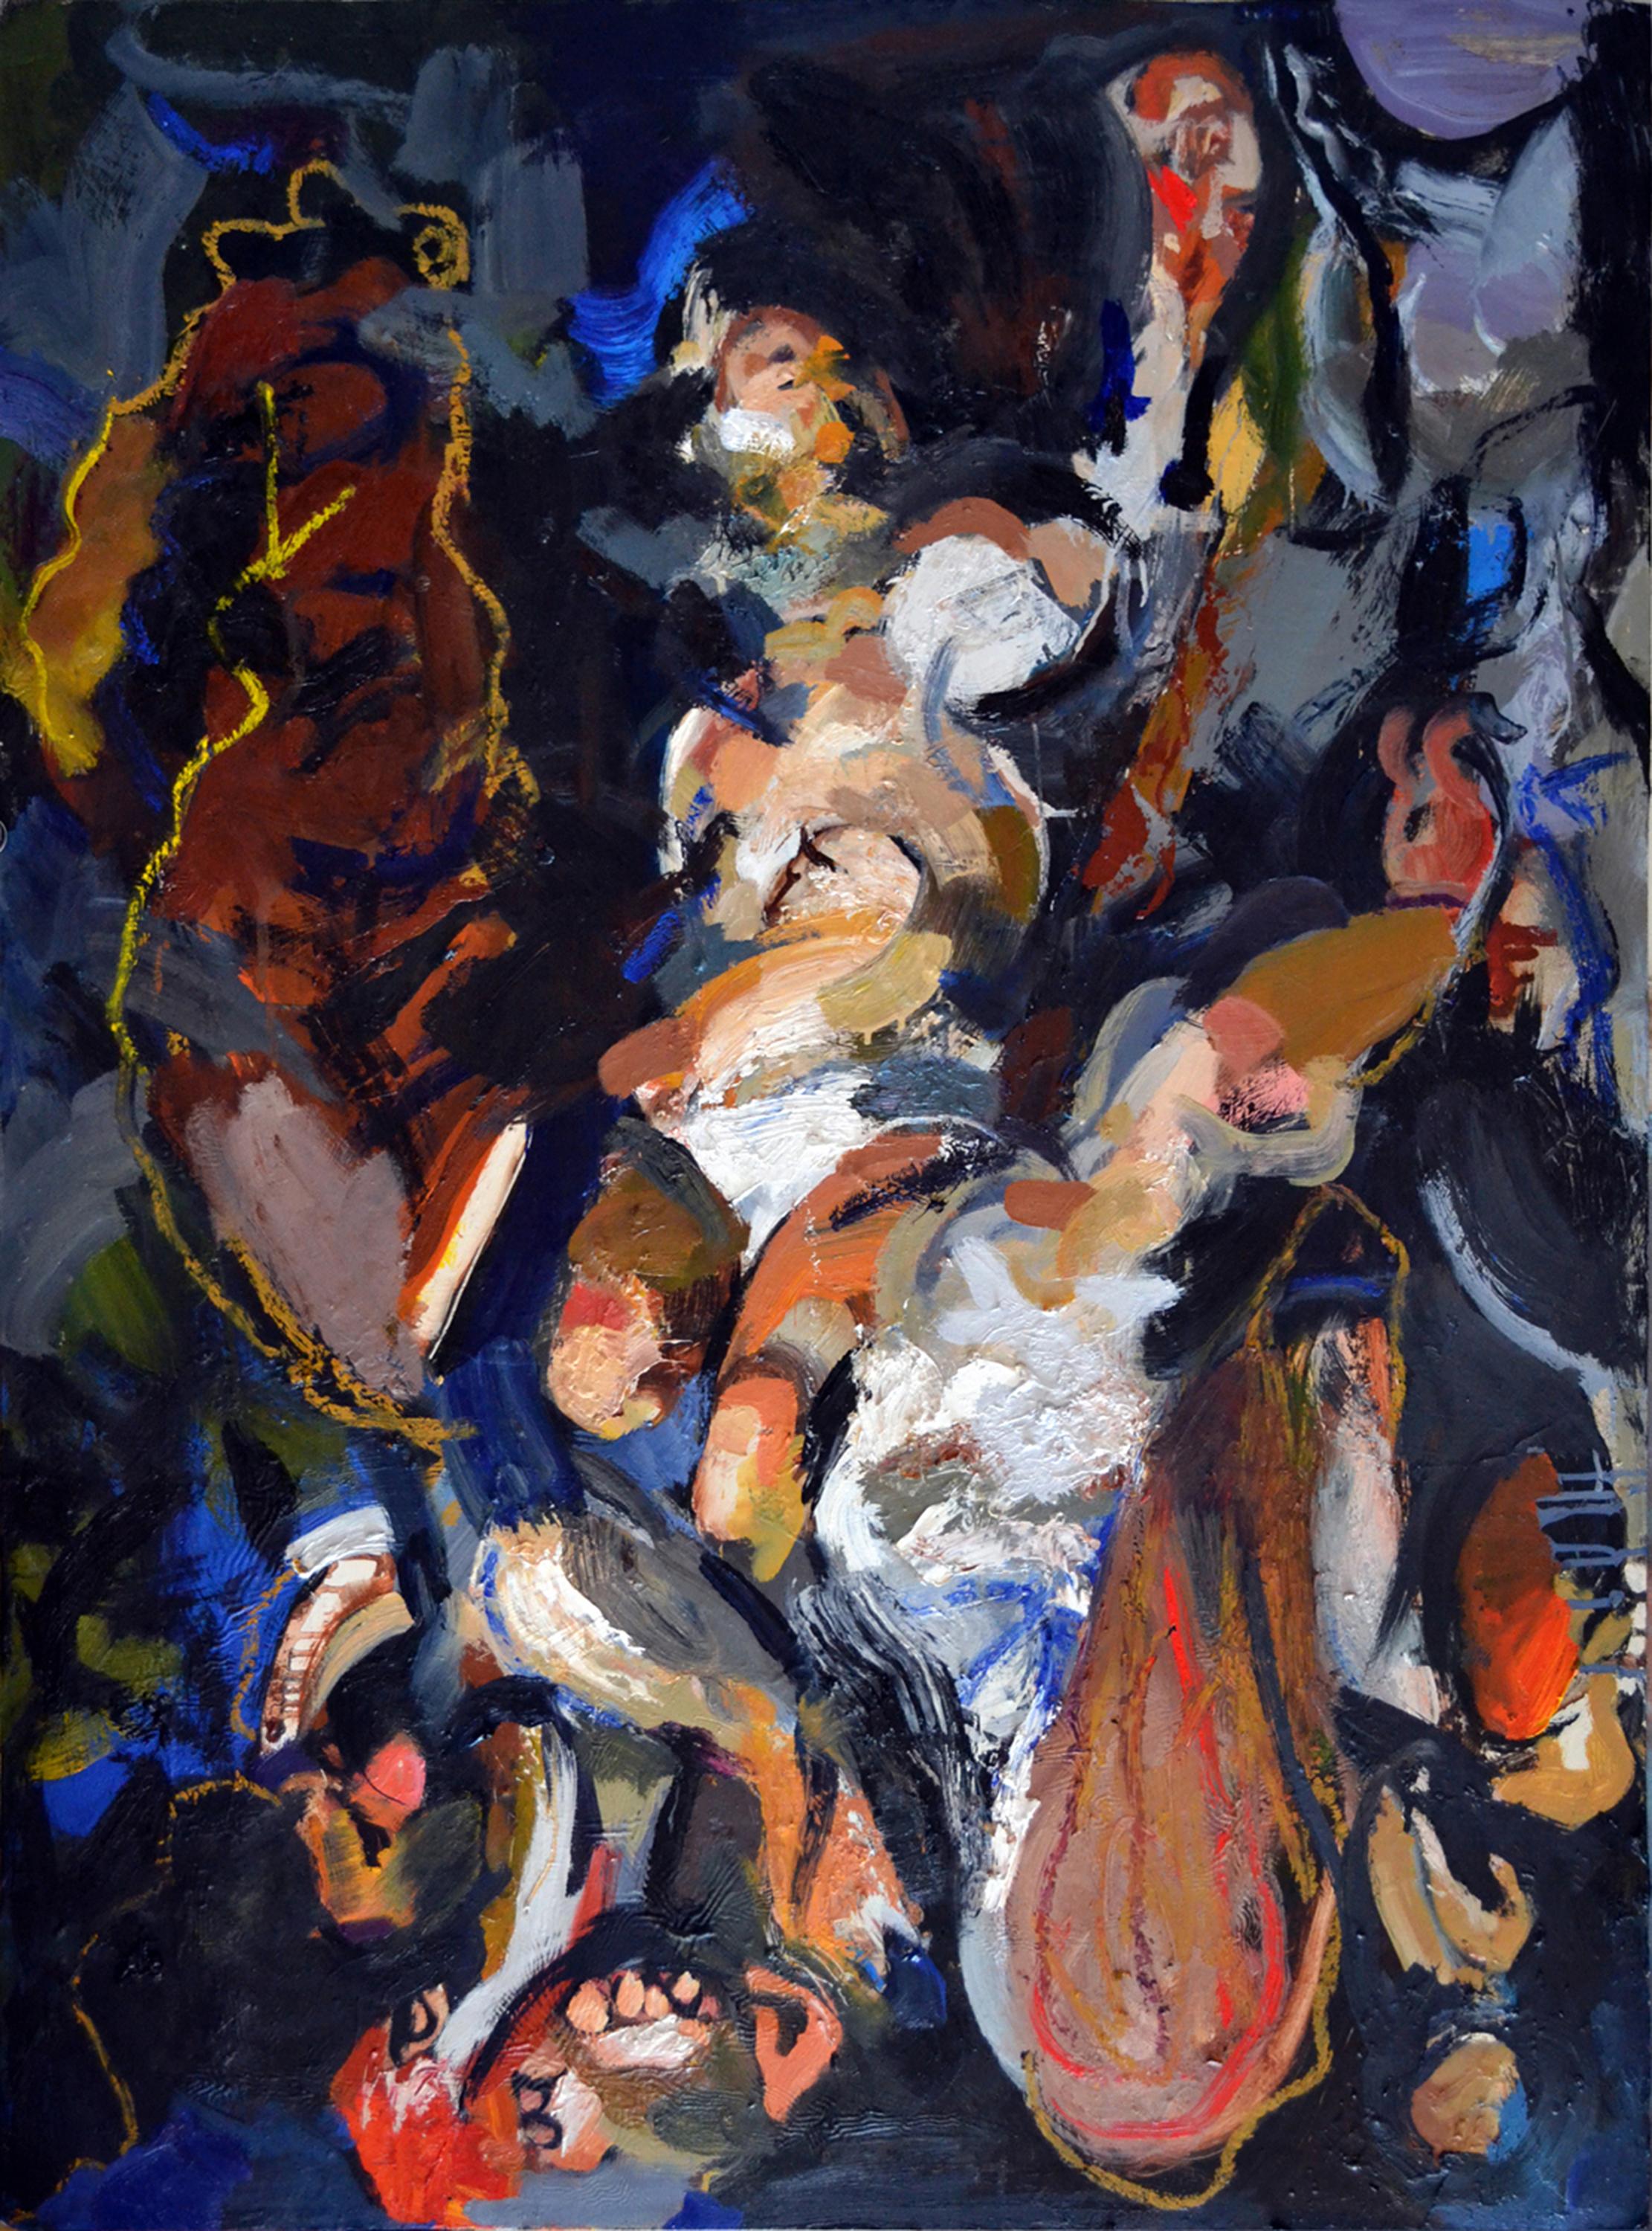 "Pete's Going Away, " colorful gestural abstraction, multiple figures